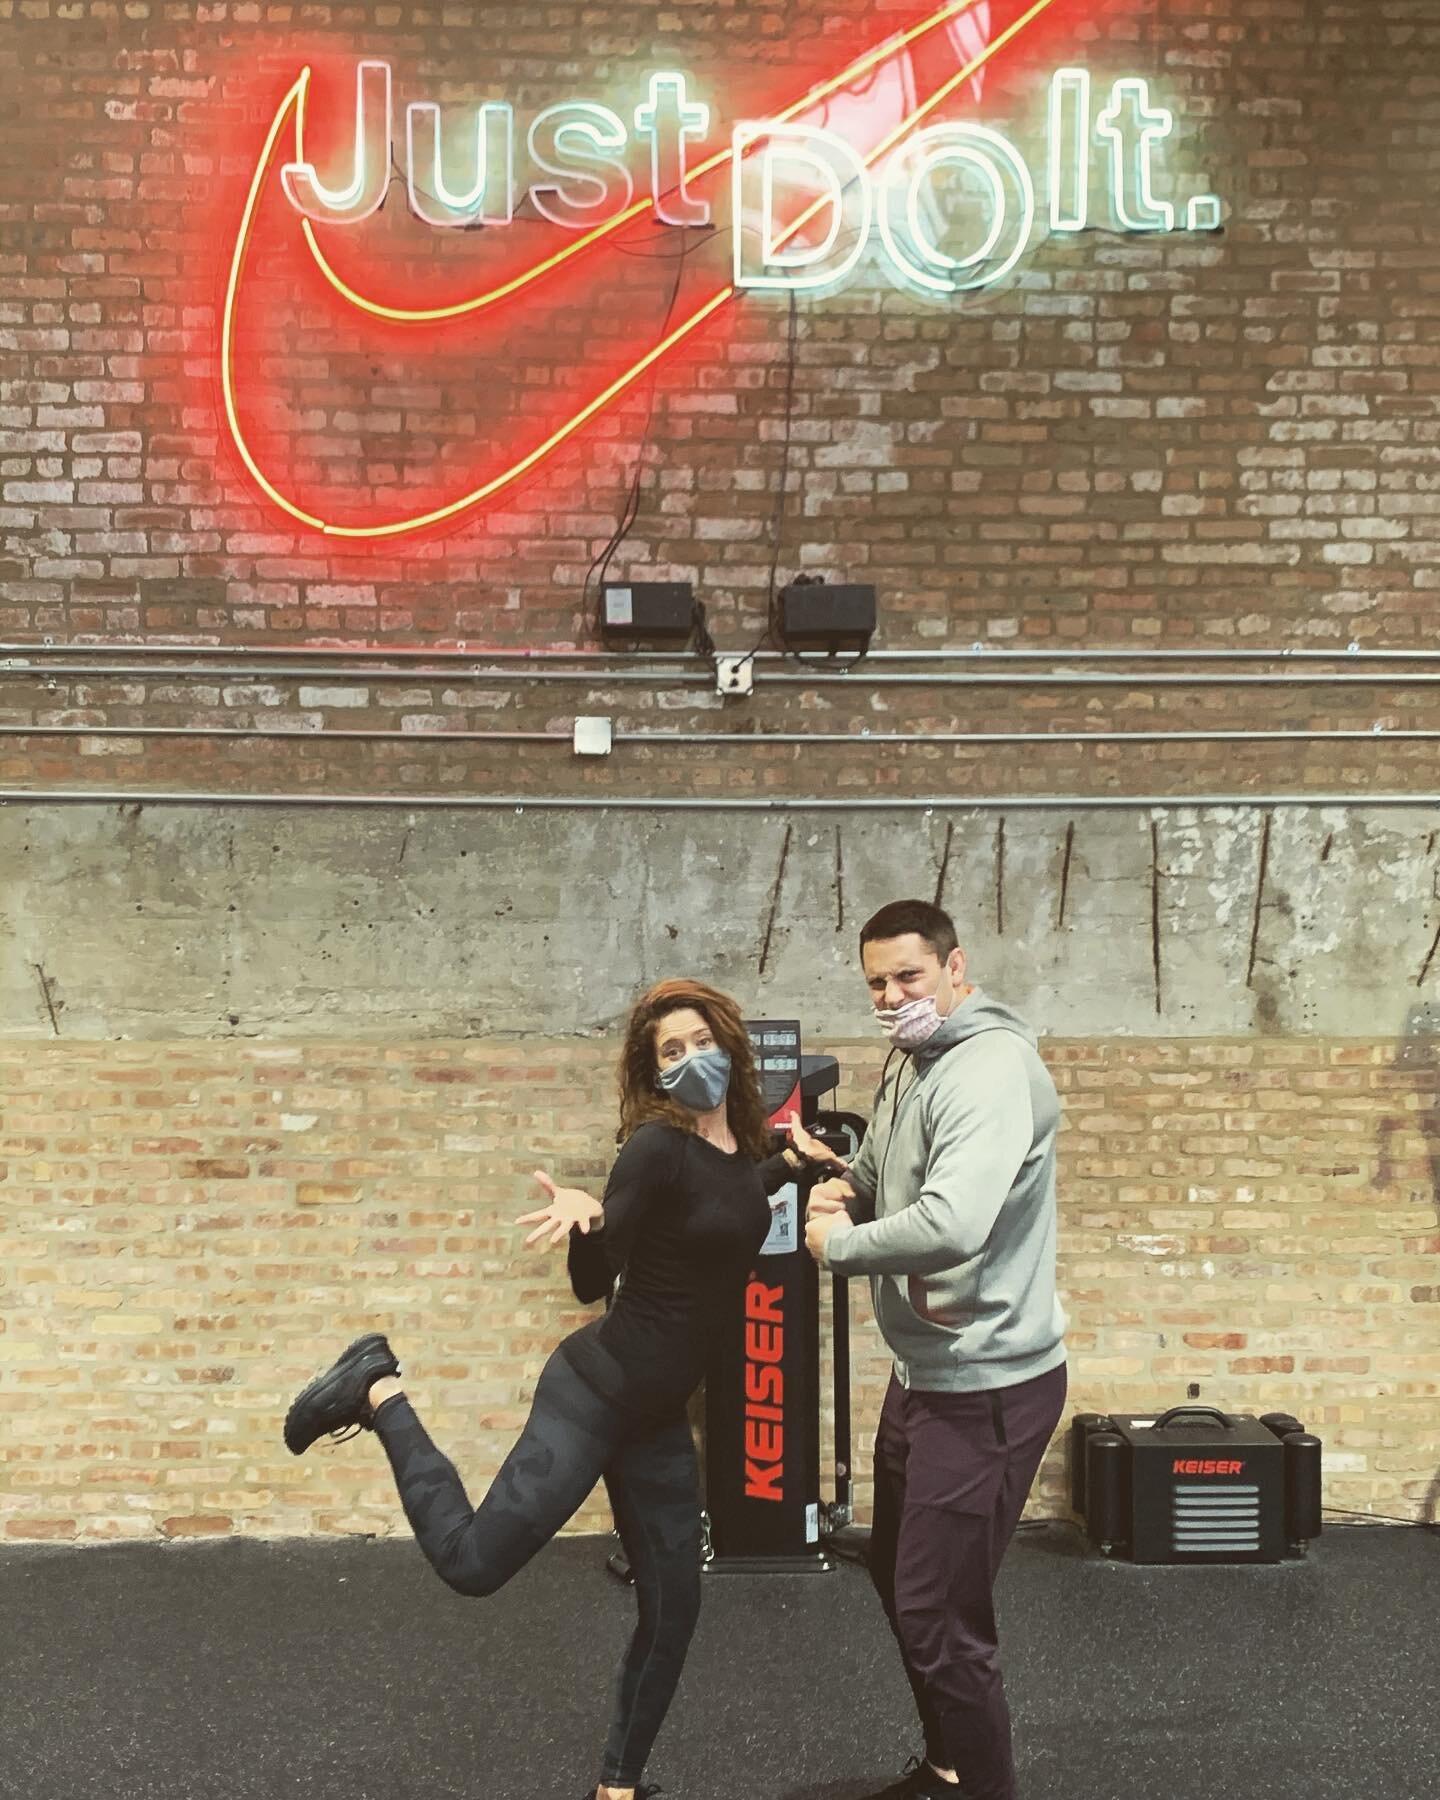 Relationships matter. When I last worked with @alexisacarra in 2006, she was a performer with Pirate Queen trying to dance with a torn ACL. Now, 14 years later, her acting career brought her back to Chicago and we teamed up again. (We&rsquo;re both a